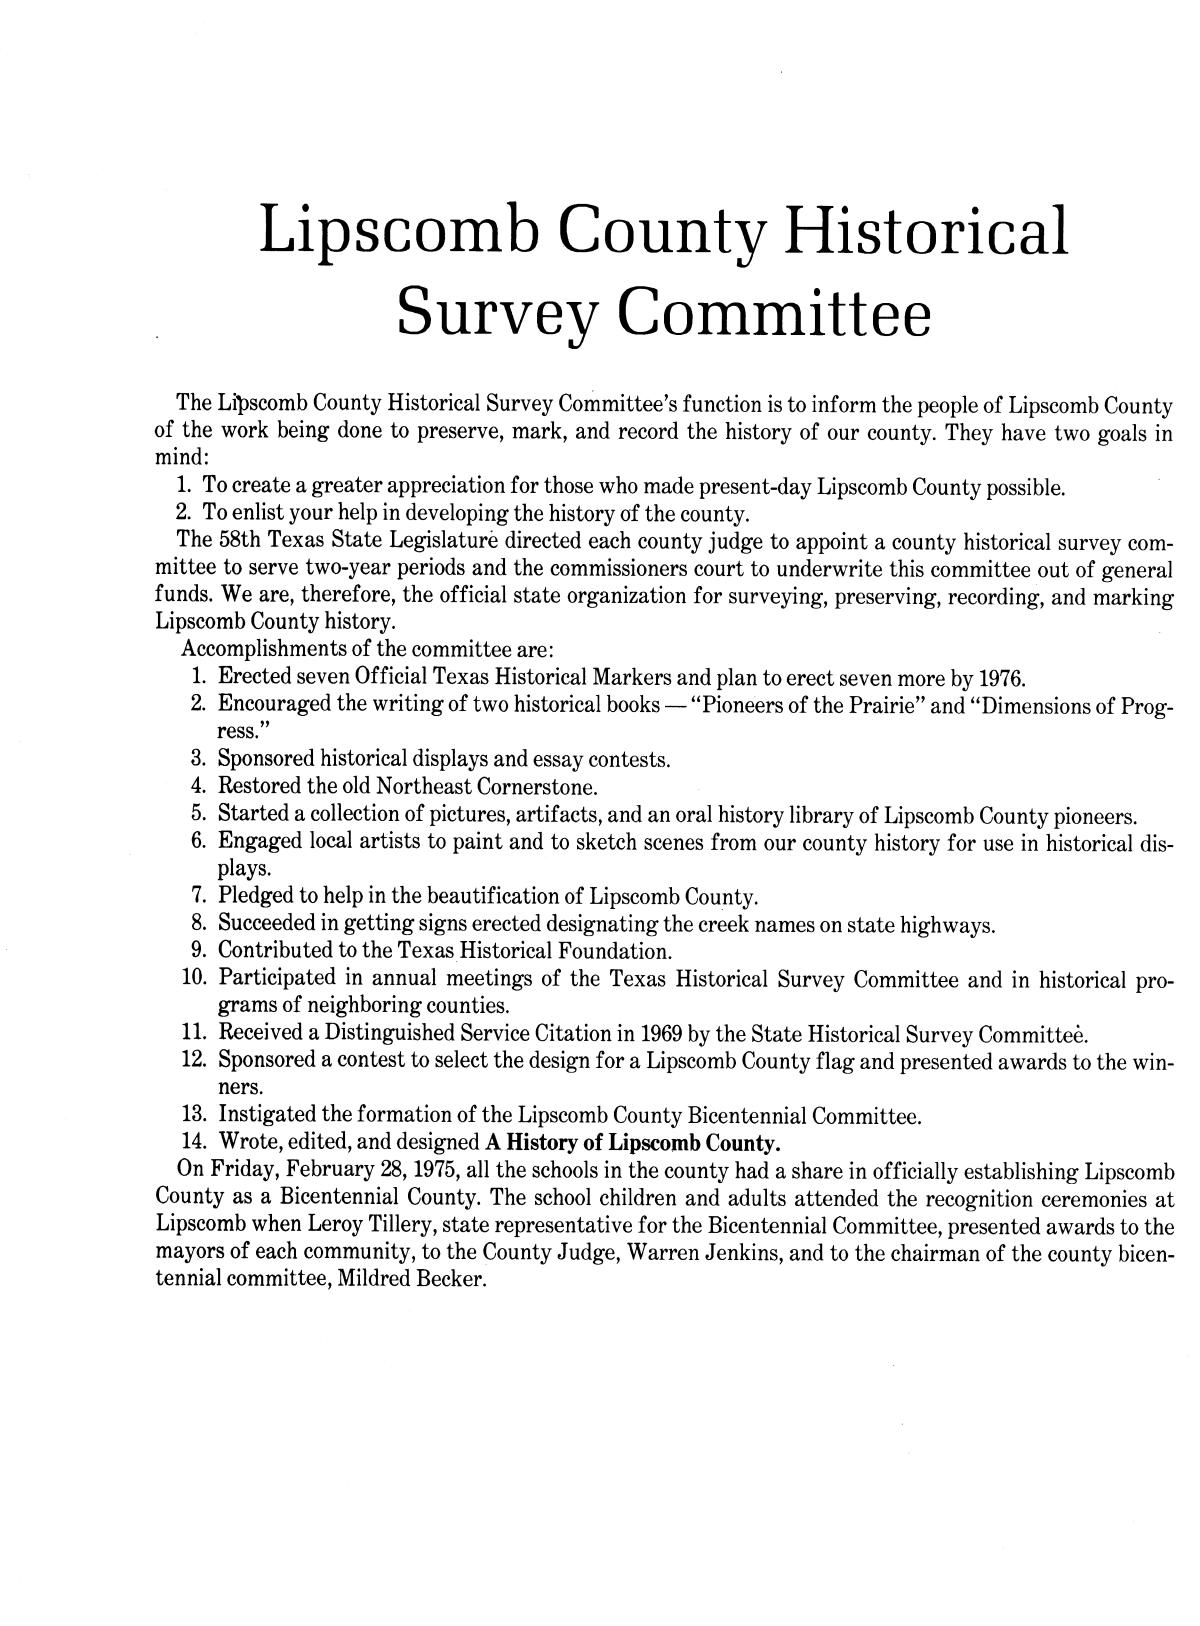 A History of Lipscomb County
                                                
                                                    2
                                                